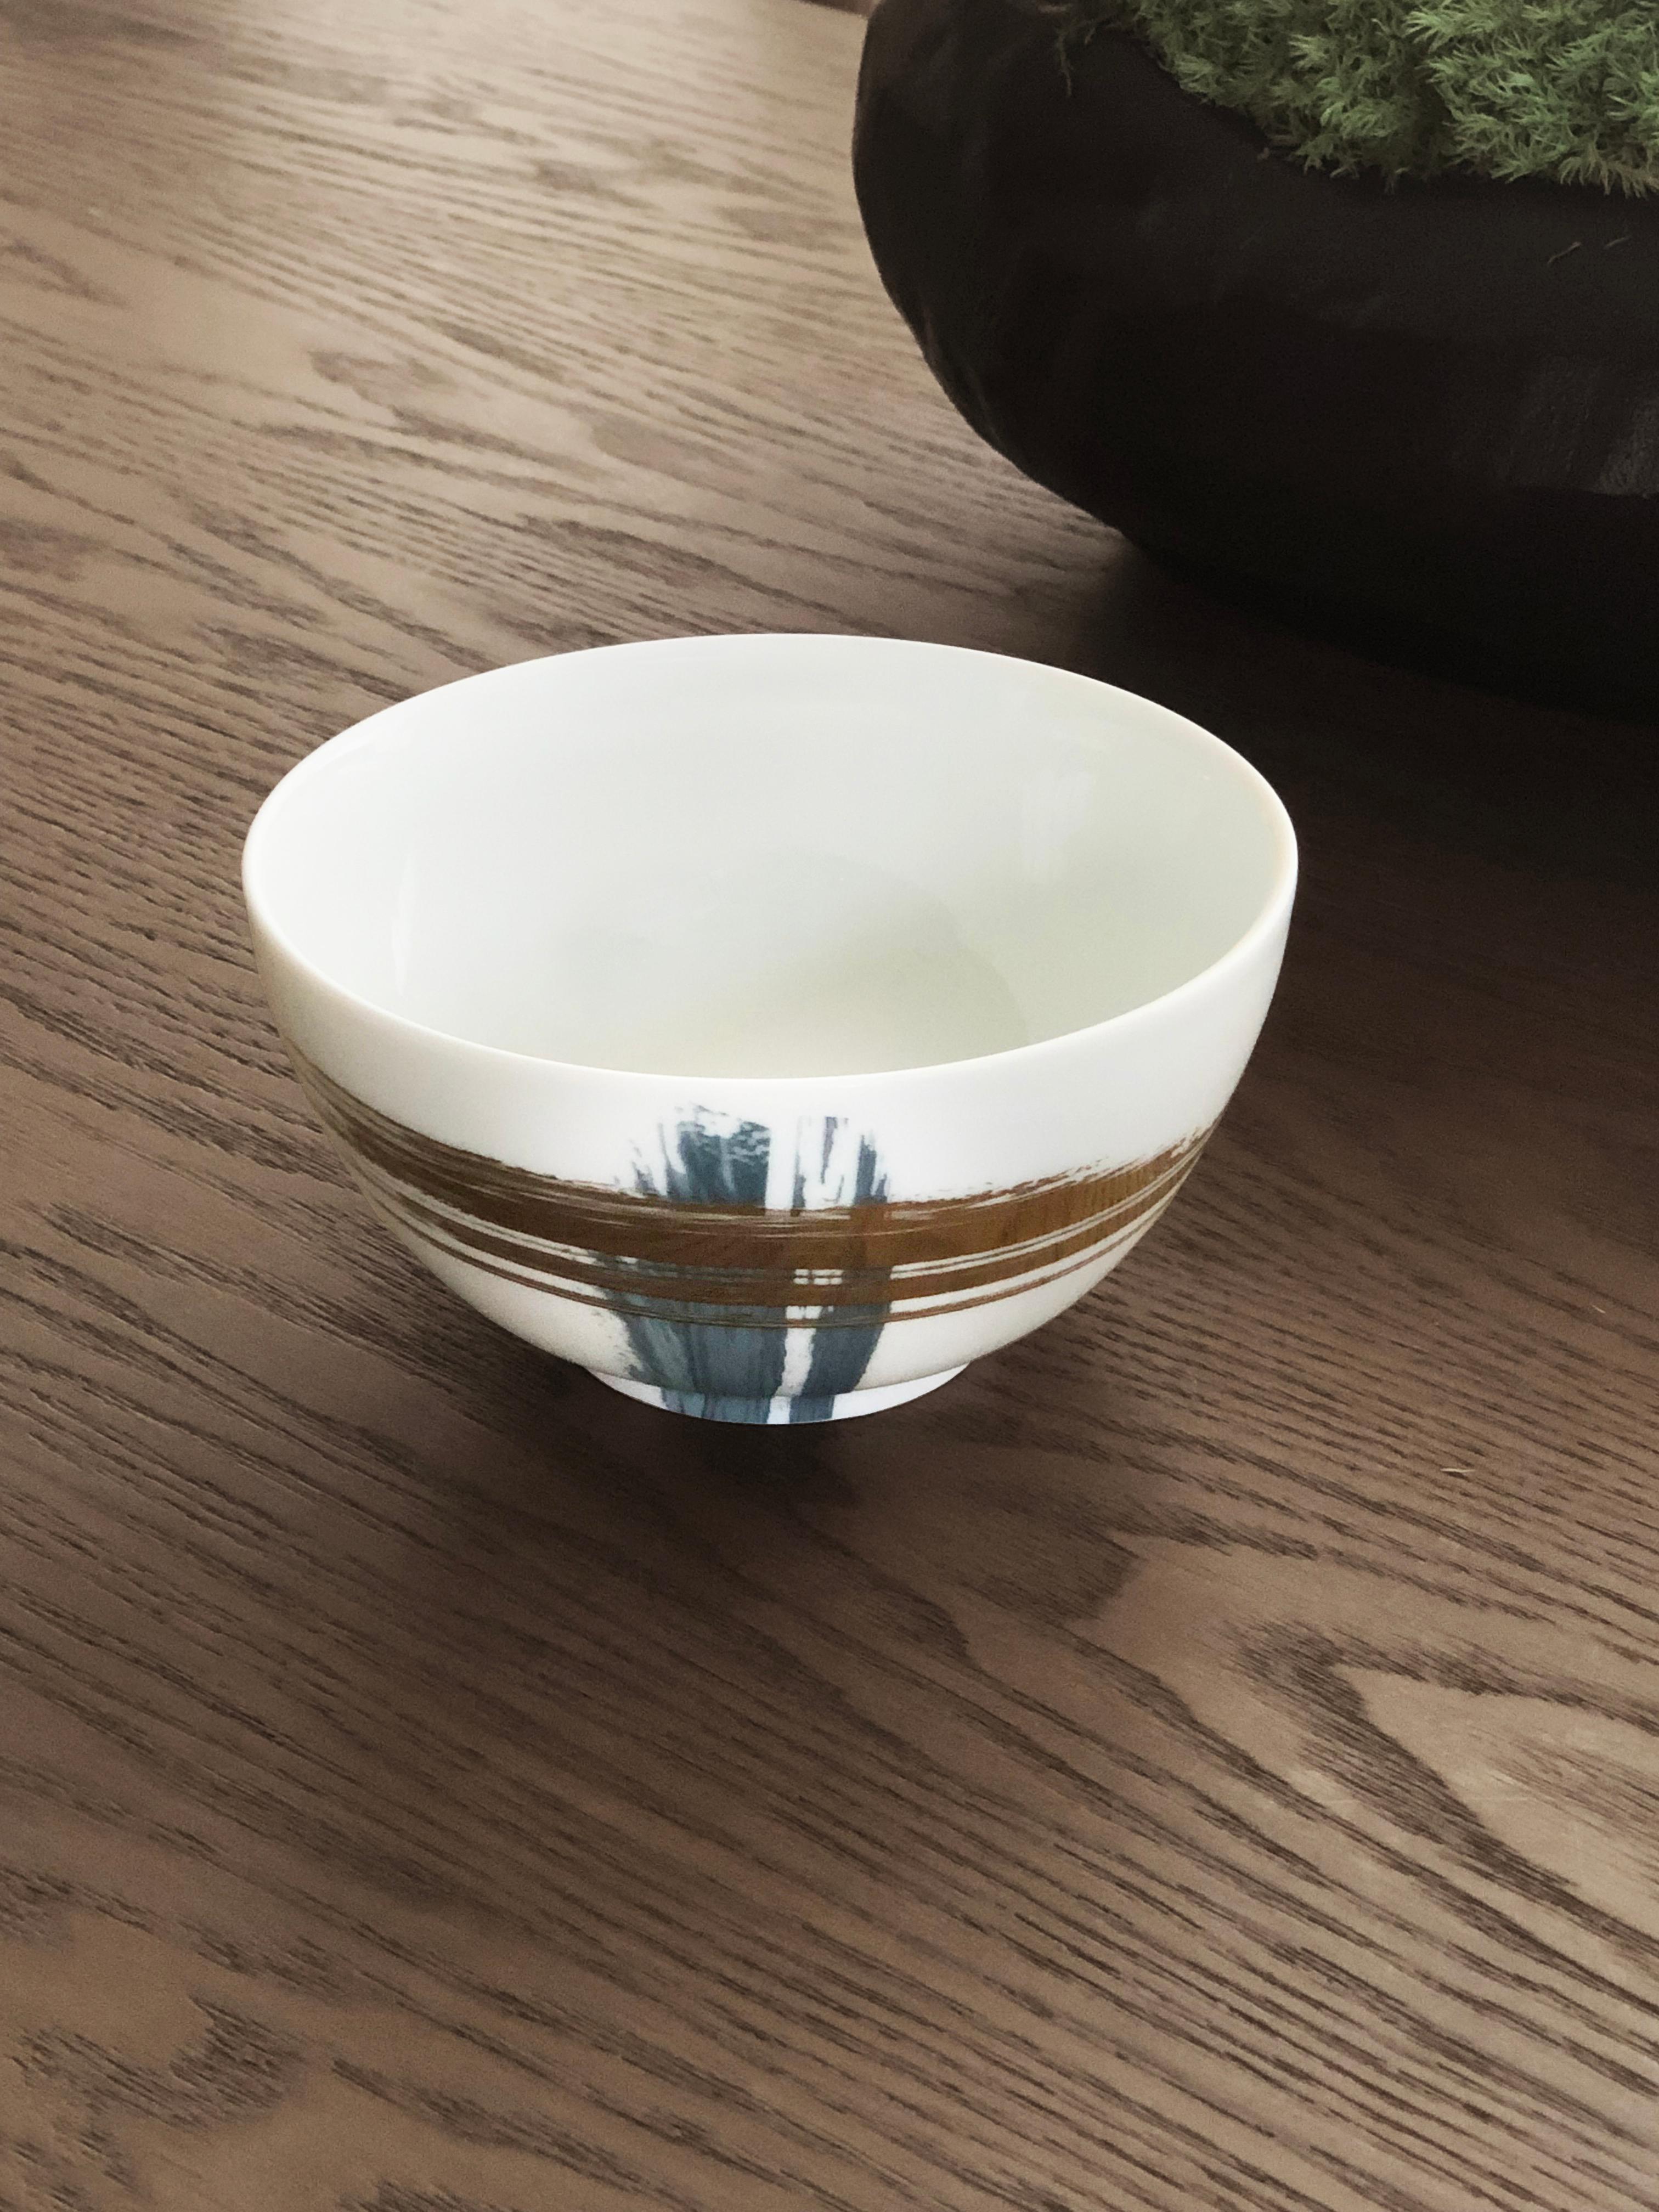 Larger quantities available upon request, with 8 weeks production time.

Description: Chinese soup bowl (2 pieces)
Color: Blue and gold
Size: 12 Ø x 6 H cm, 250 ml
Material: Porcelain and gold
Collection: Artisan Brush